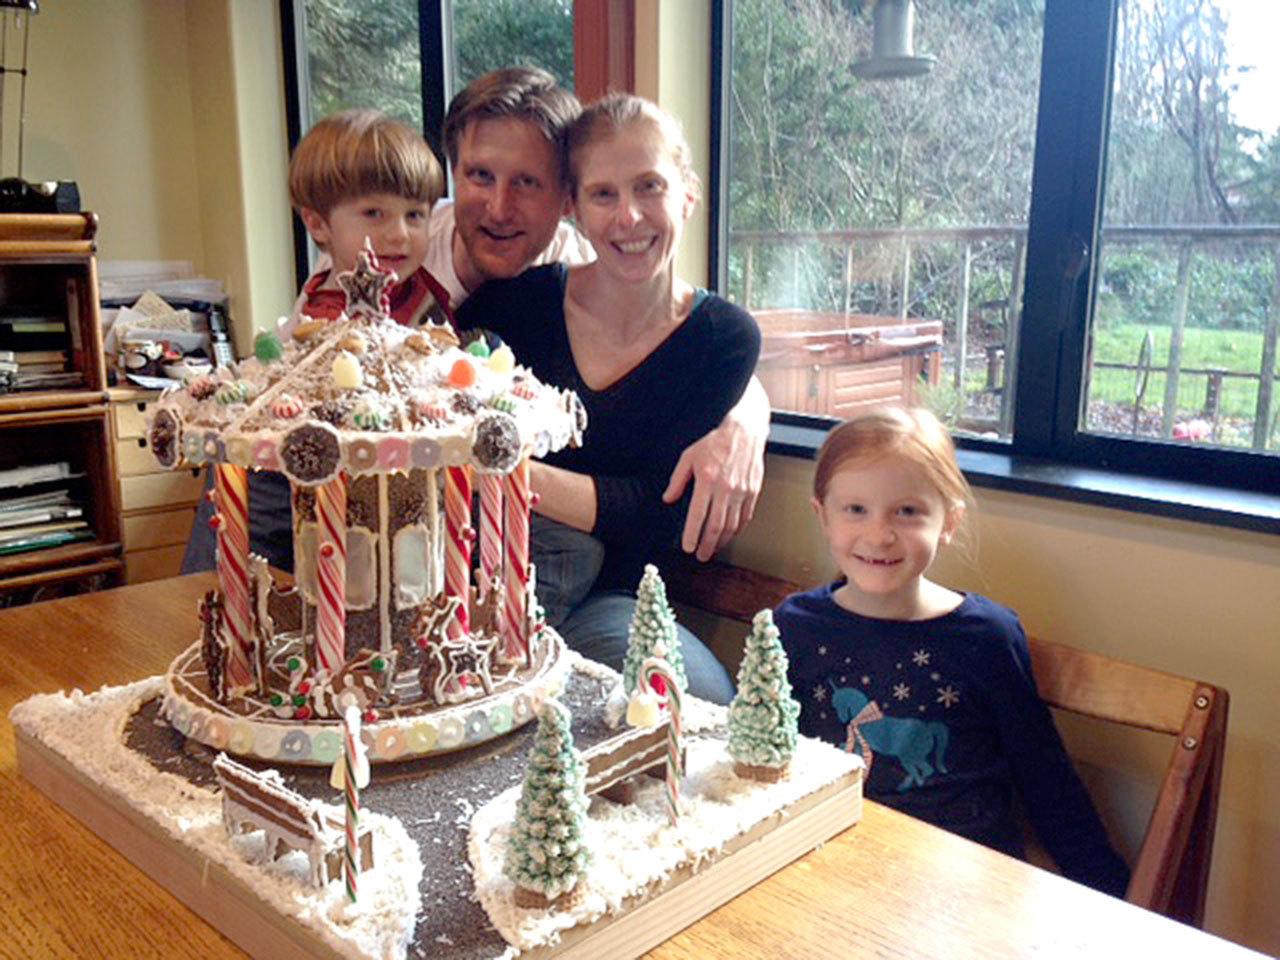 Eric and Holly Kuzma, with their son Cabett and daughter Anora, display their gingerbread house that won this year.